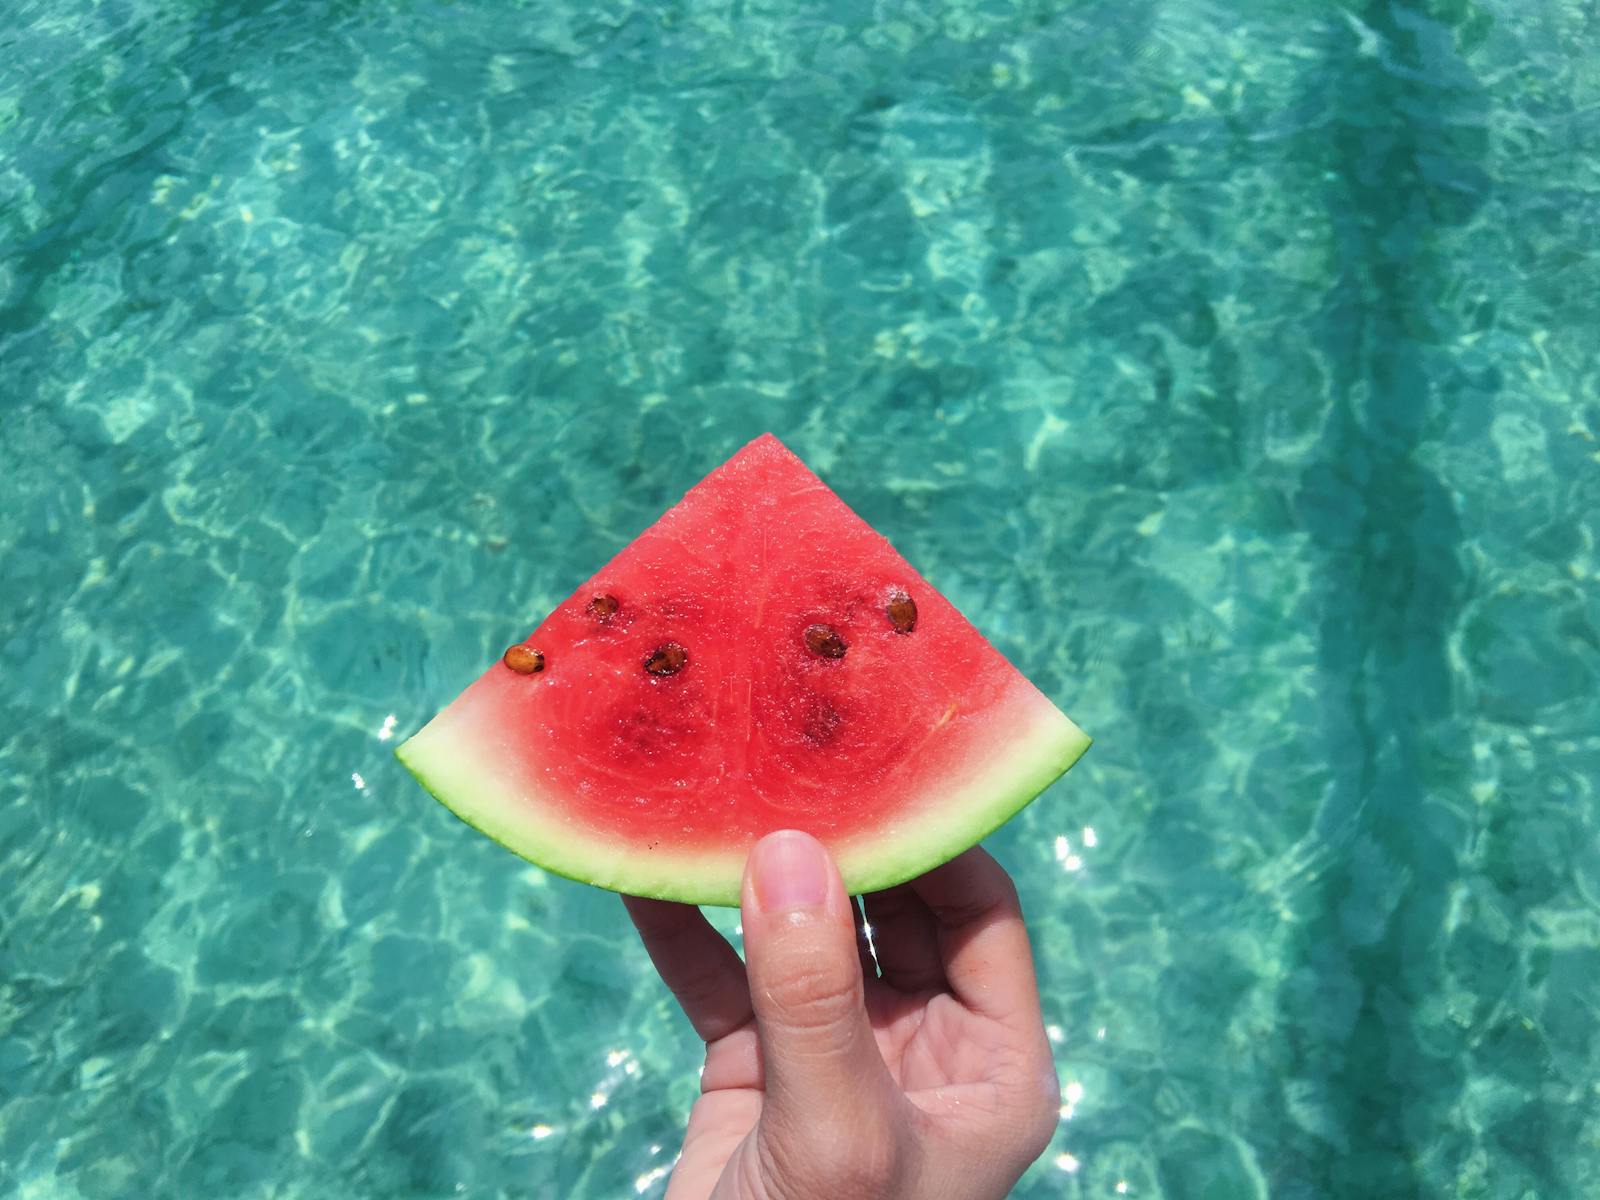 Hand Holding a Slice of Watermelon With Blue Swimming Pool Water in the Background Photo by Elaine Bernadine Castro from Pexels: https://www.pexels.com/photo/hand-holding-a-slice-of-watermelon-with-blue-swimming-pool-water-in-the-background-2403850/